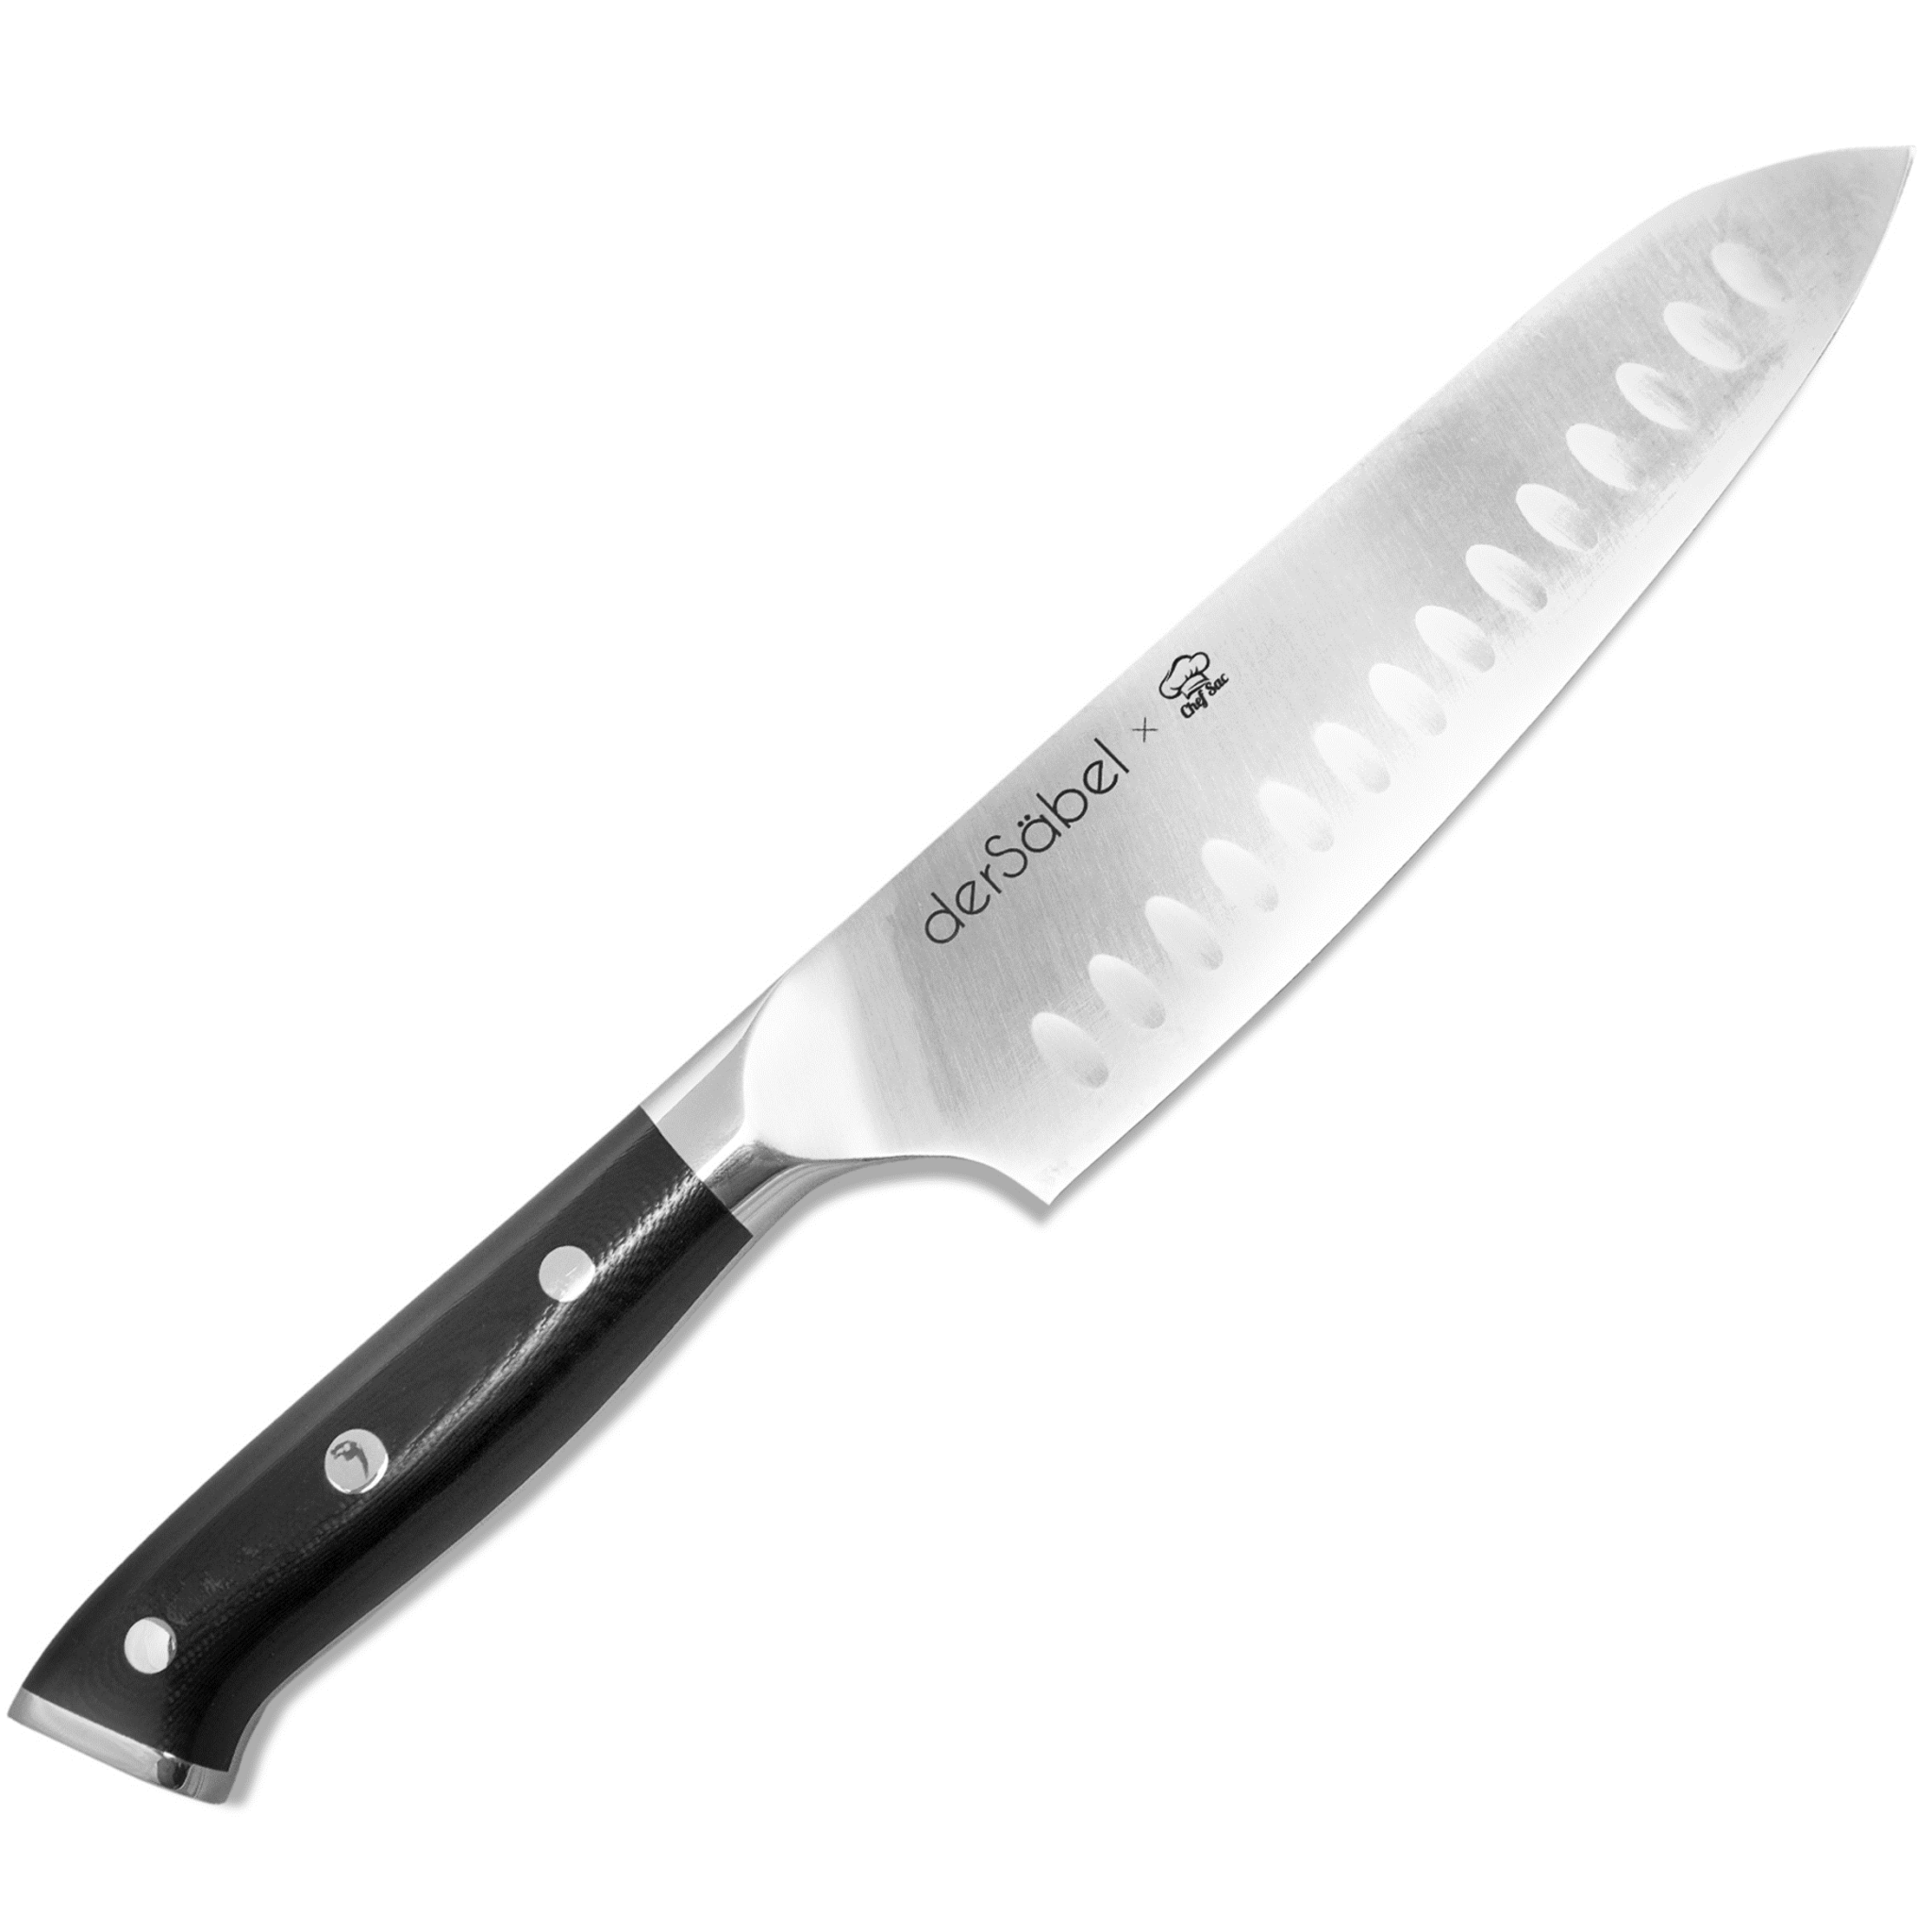 Santoku Chef's Knife 7 inch: Best Quality Professional Scalloped (gran –